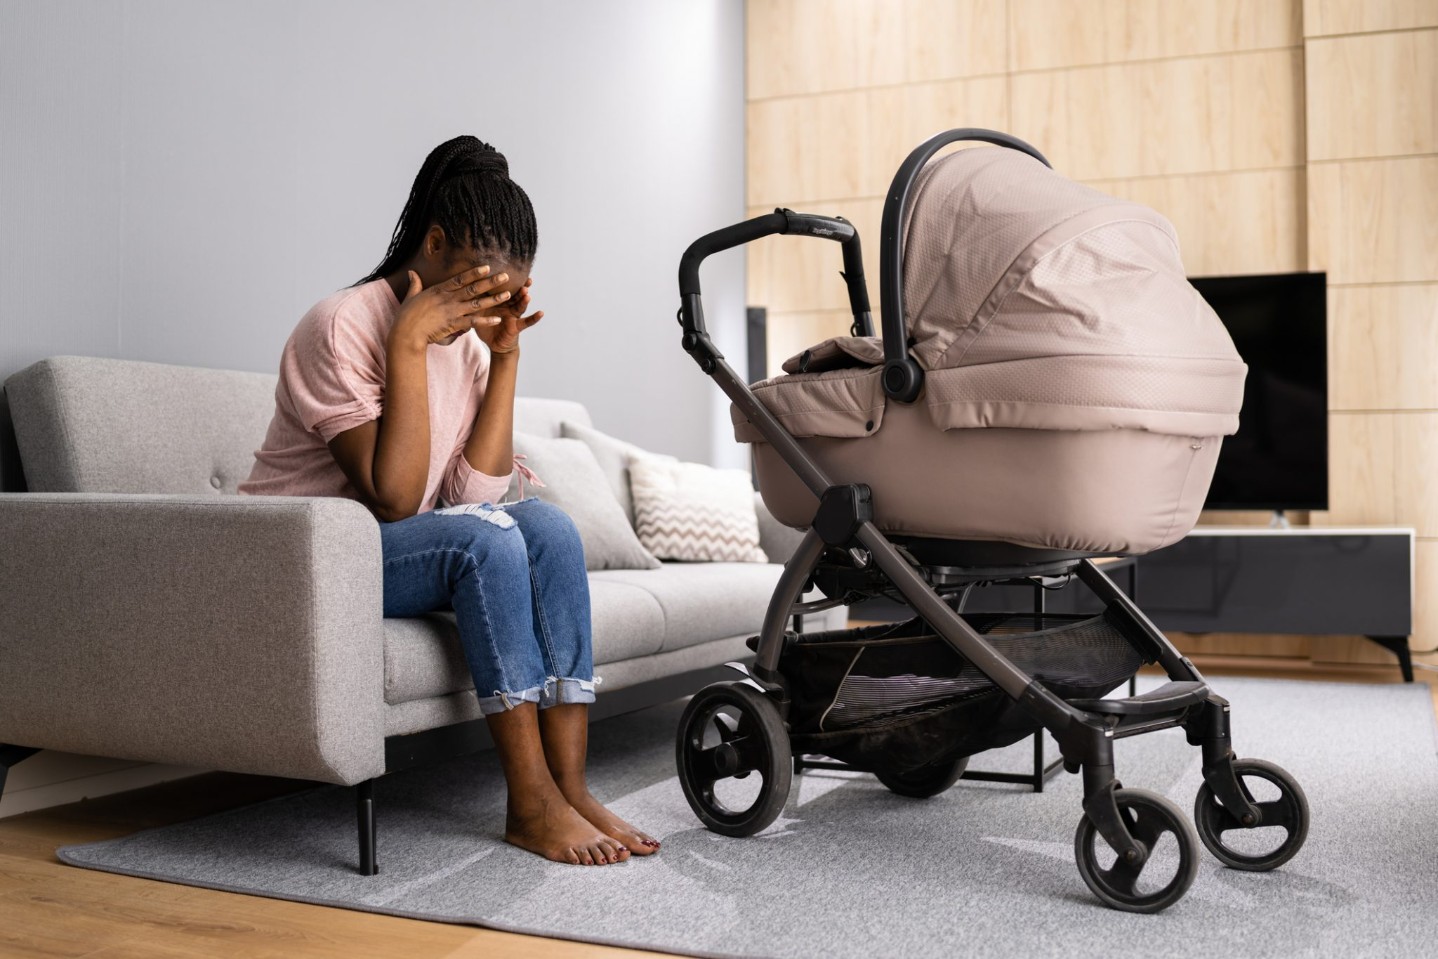 Depressed Unhappy African American Woman With Newborn